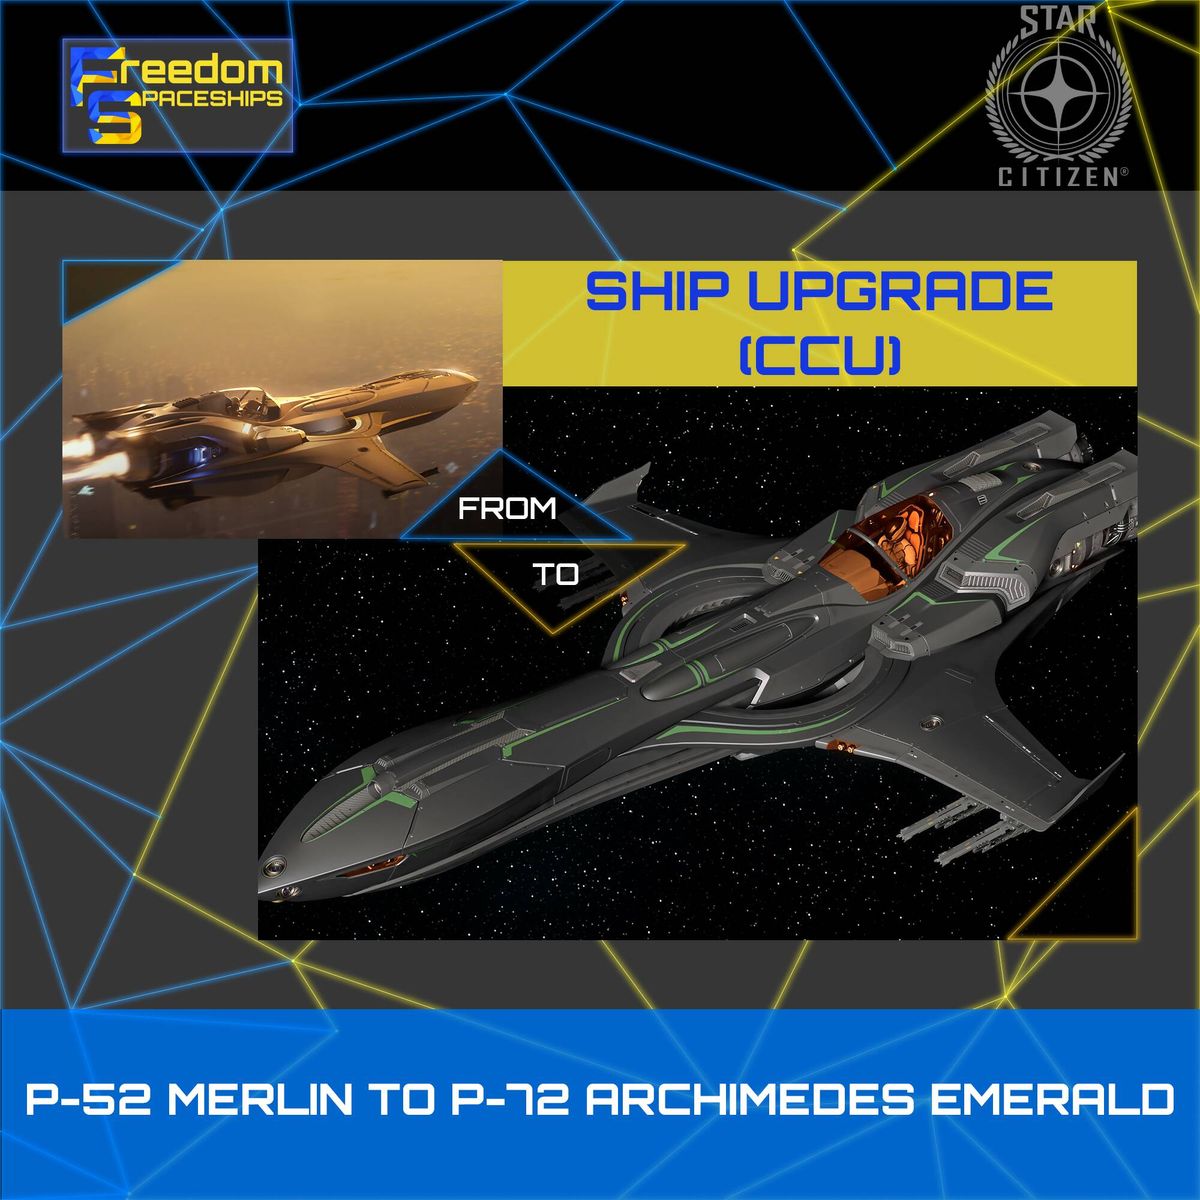 Upgrade - P-52 Merlin to P-72 Archimedes Emerald